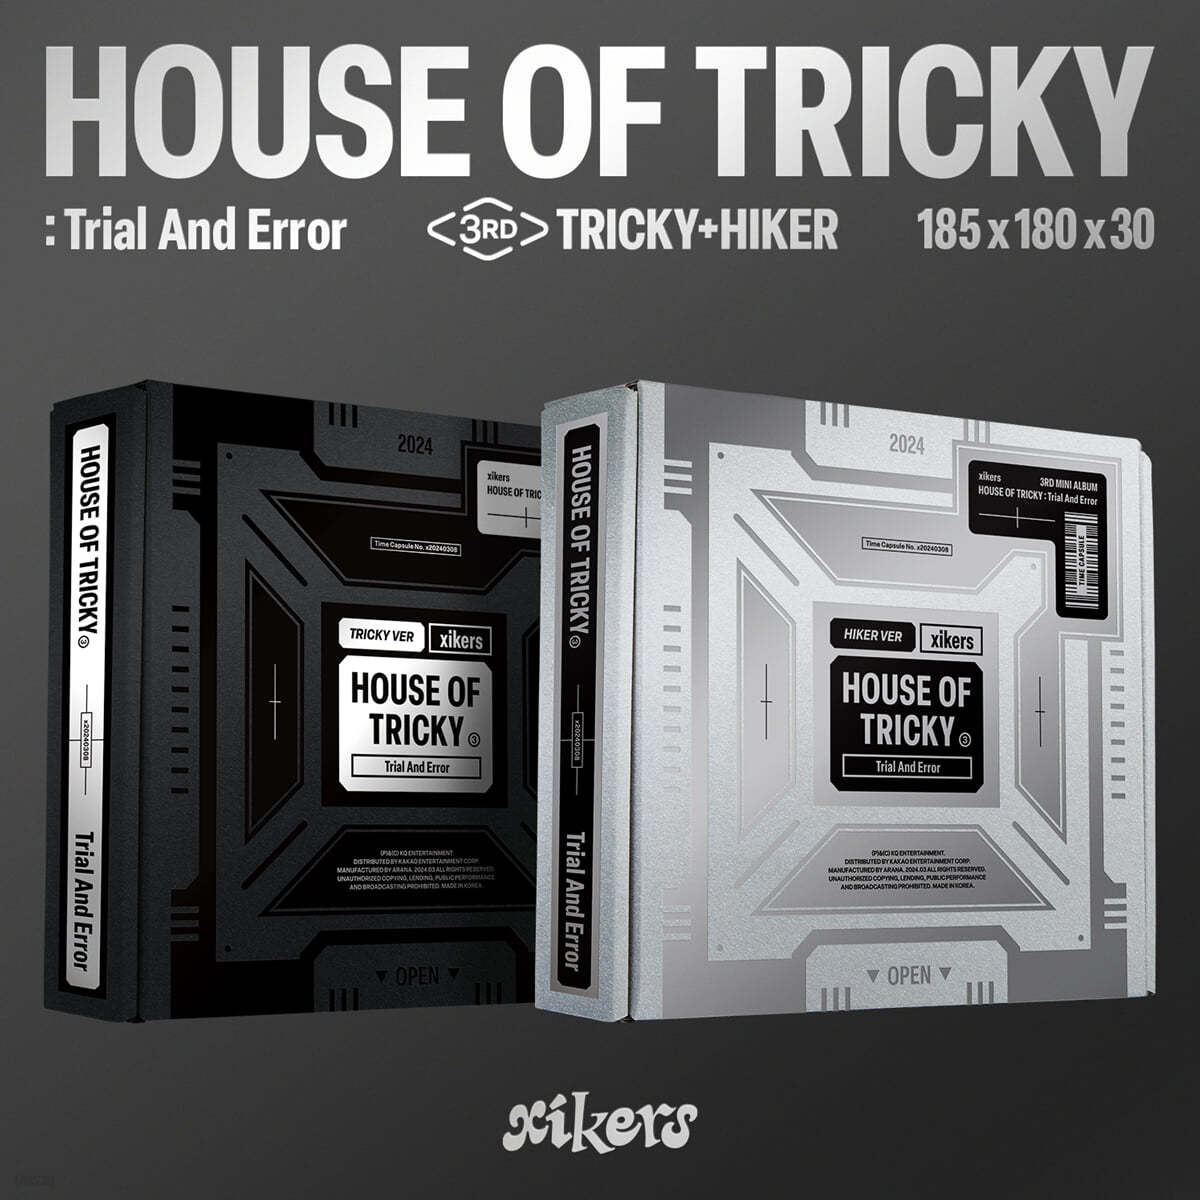 XIKERS - HOUSE OF TRICKY TRIAL AND ERROR 3RD MINI ALBUM